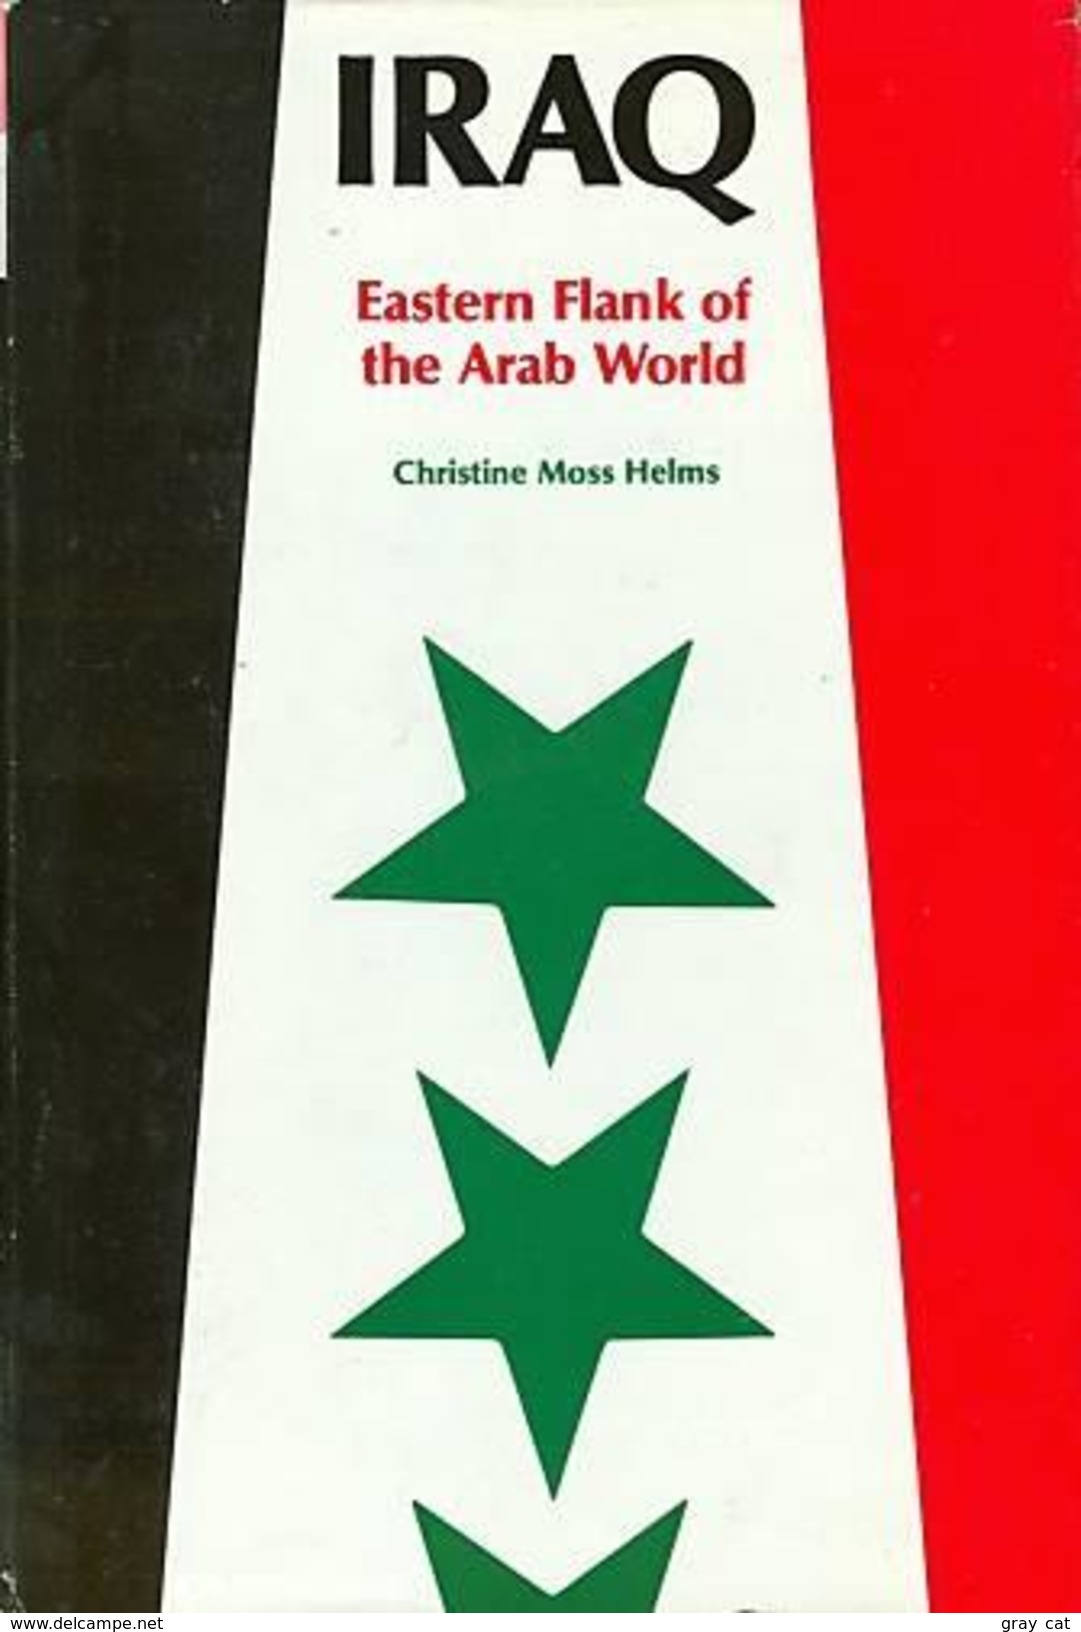 Iraq: Eastern Flank Of The Arab World By Christine Moss Helms (ISBN 9780815735564) - Middle East